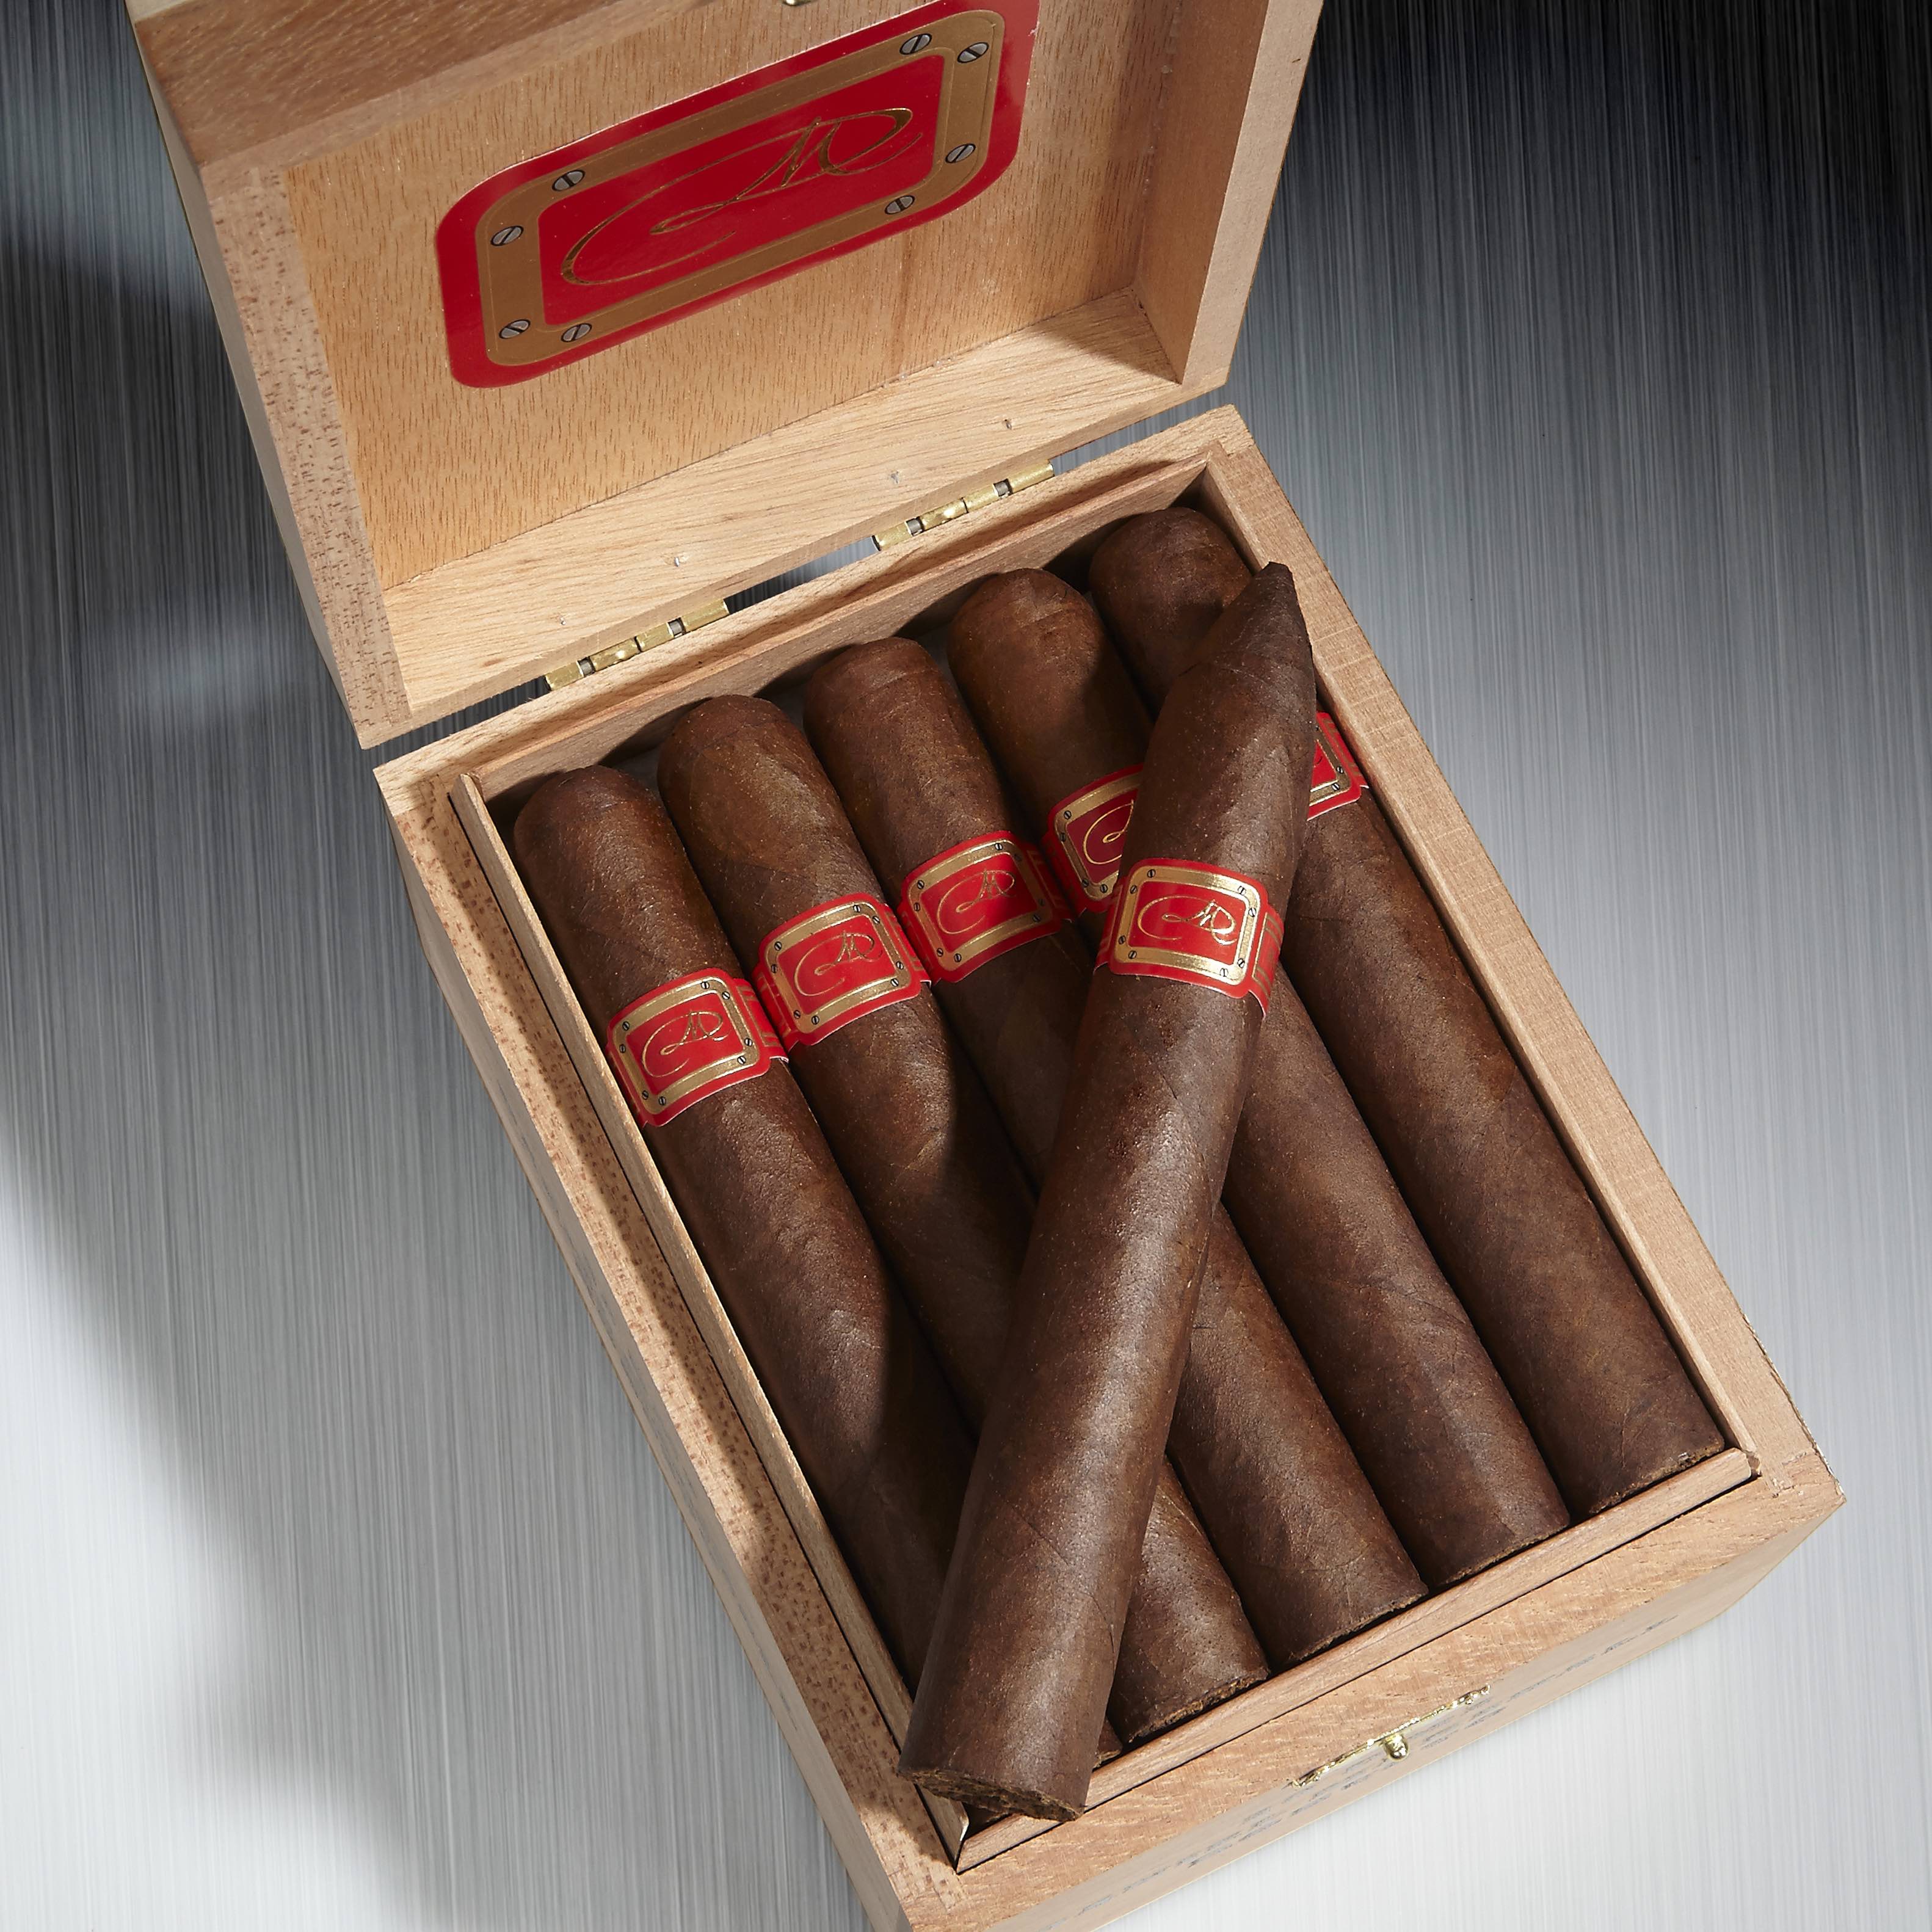 Daniel Marshall Red Label Robusto in Box